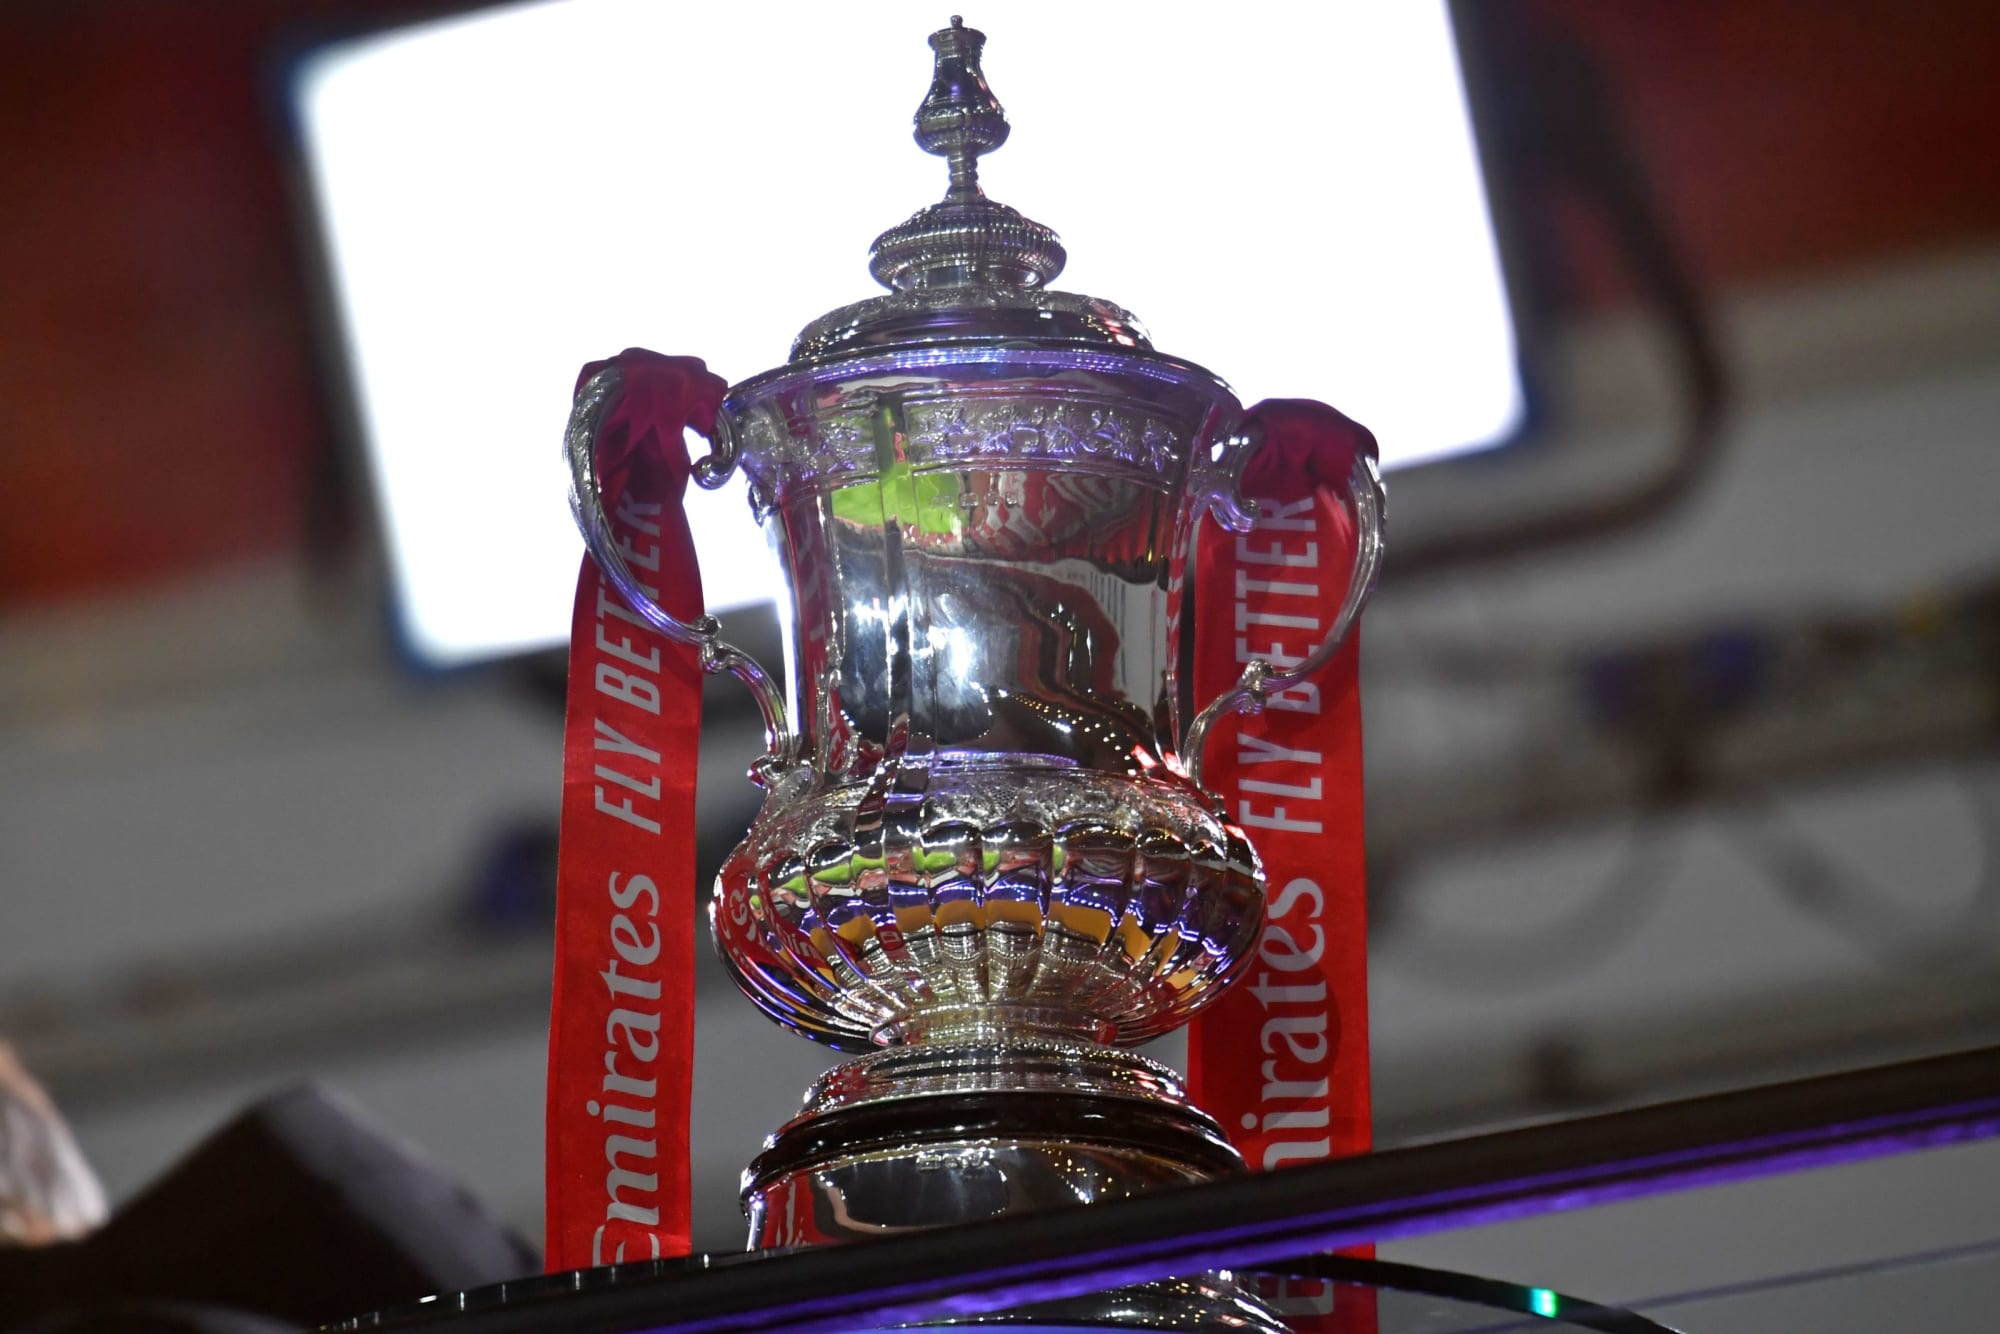 Southampton FA Cup schedule could see league fixture postponed